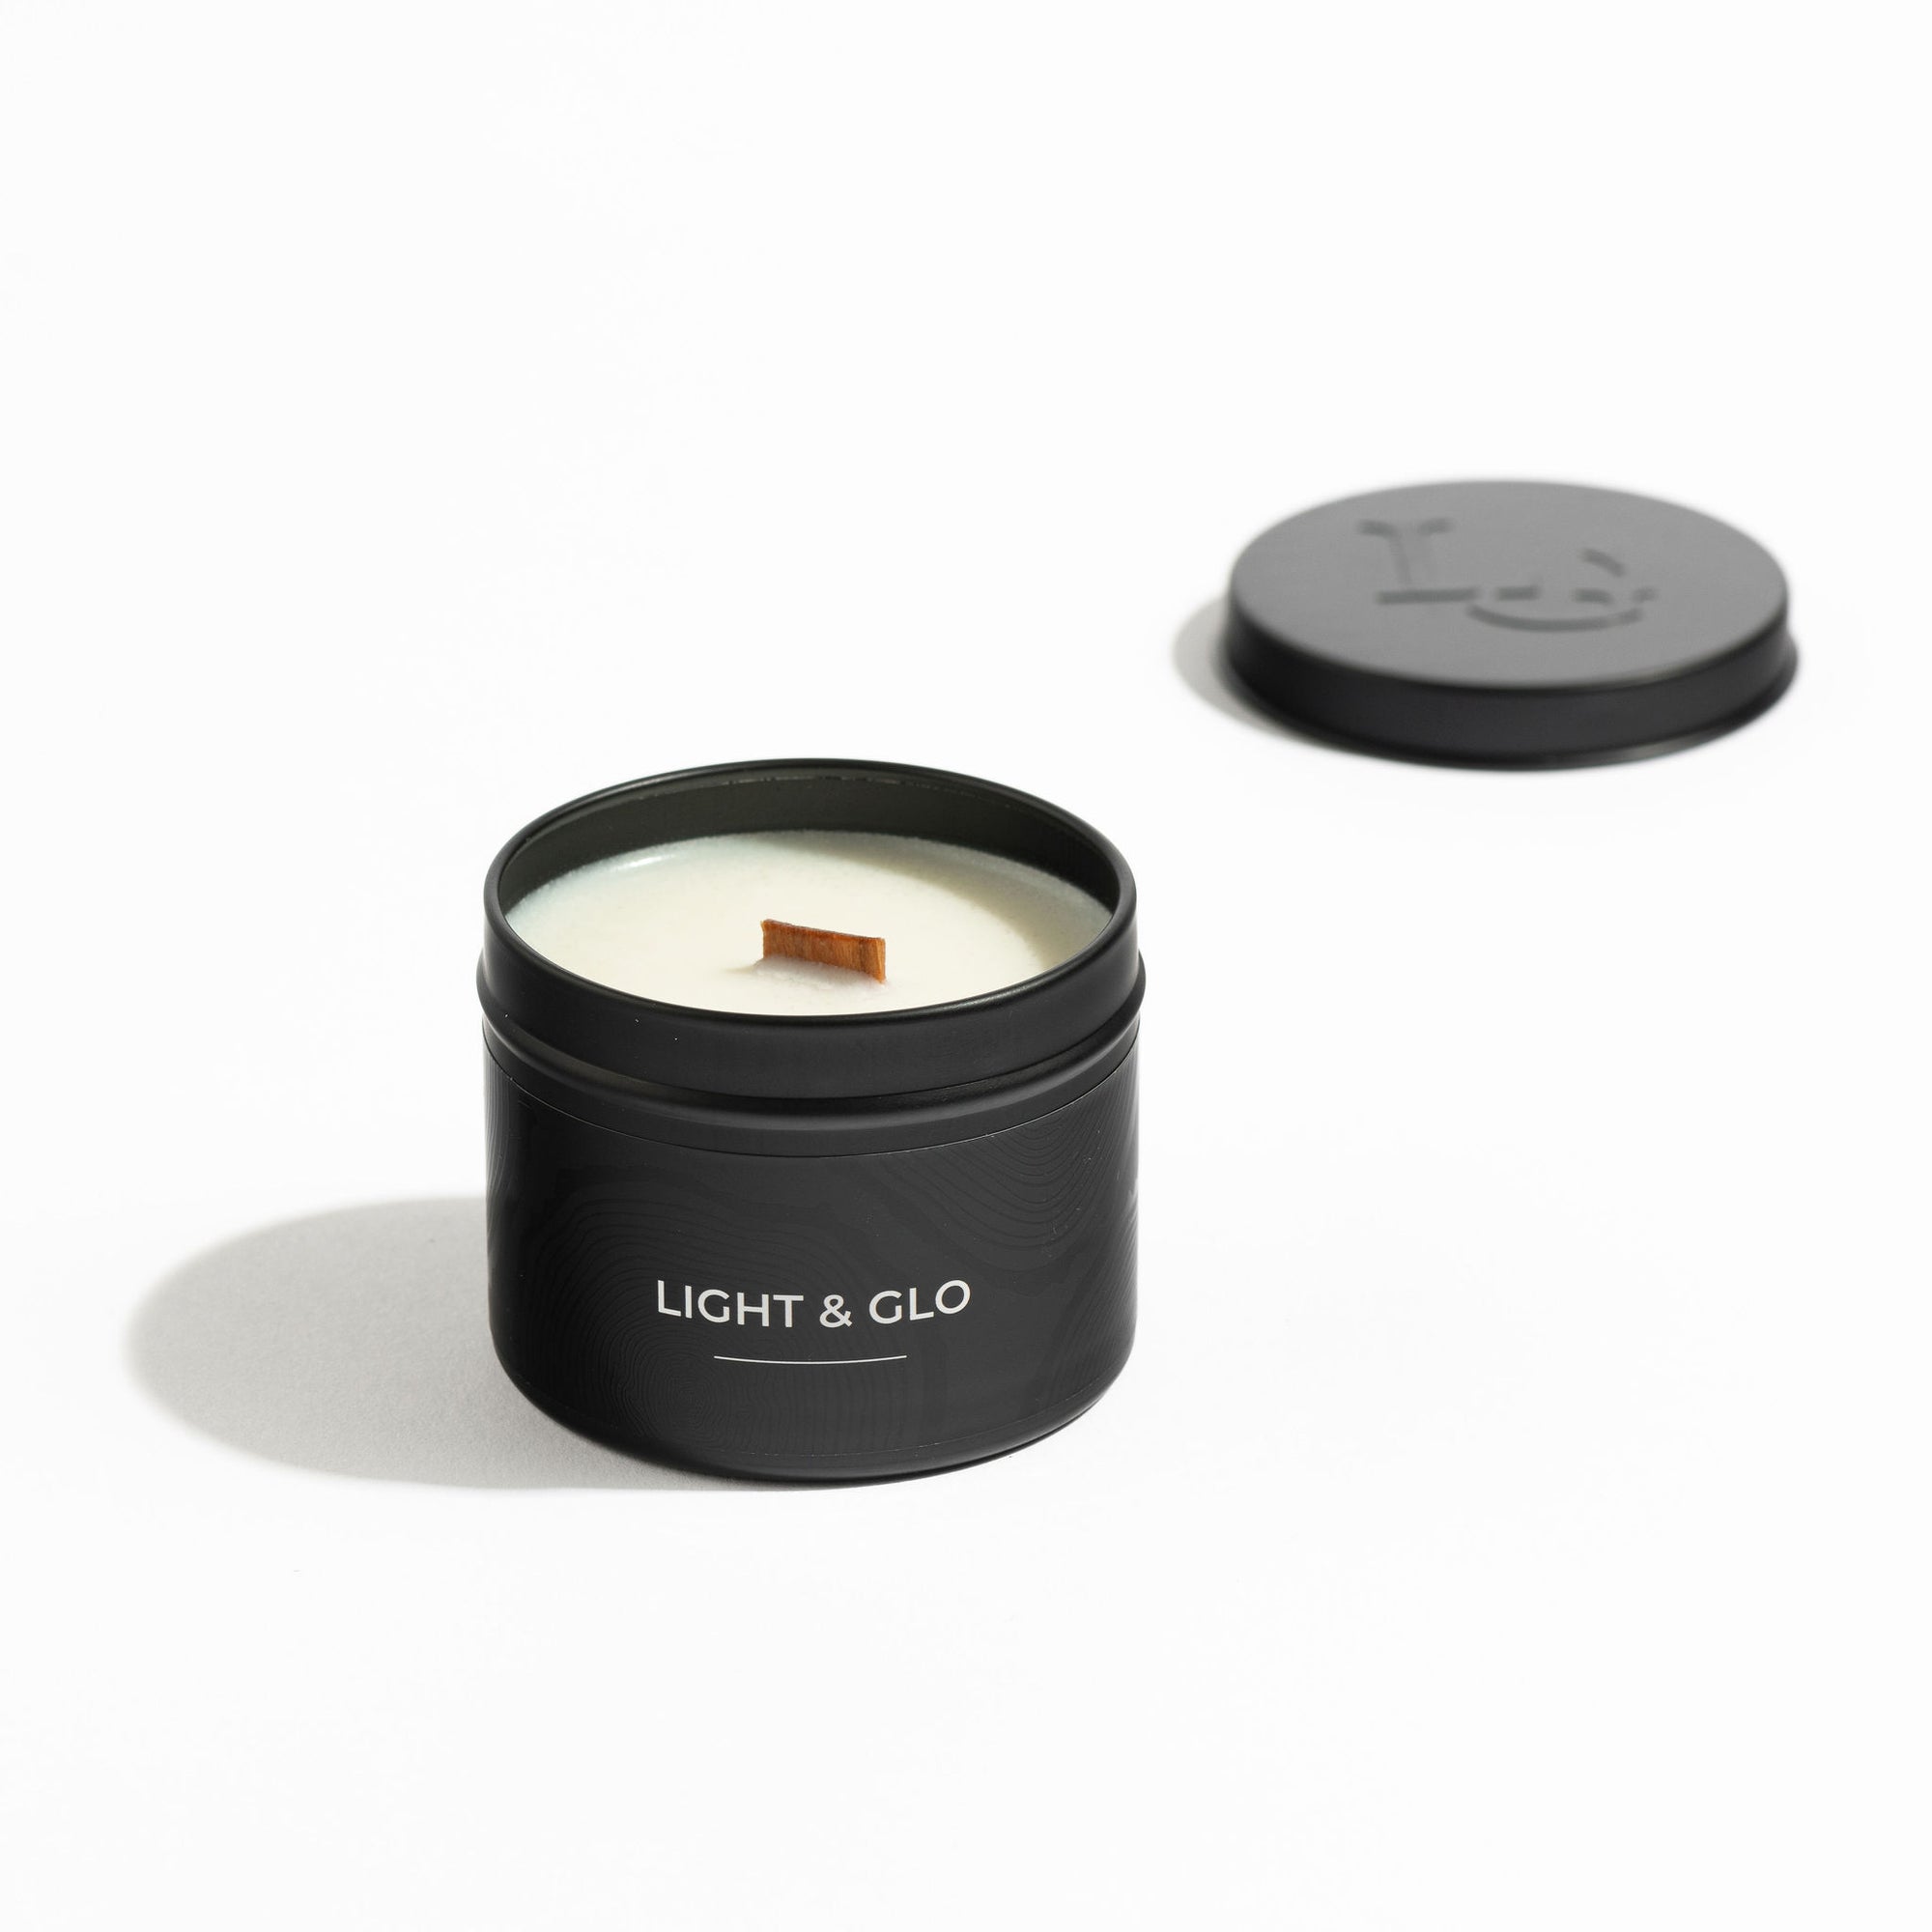 Silver Fox - Noir Travel Candle | Luxury Candles & Home Fragrances by Light + Glo